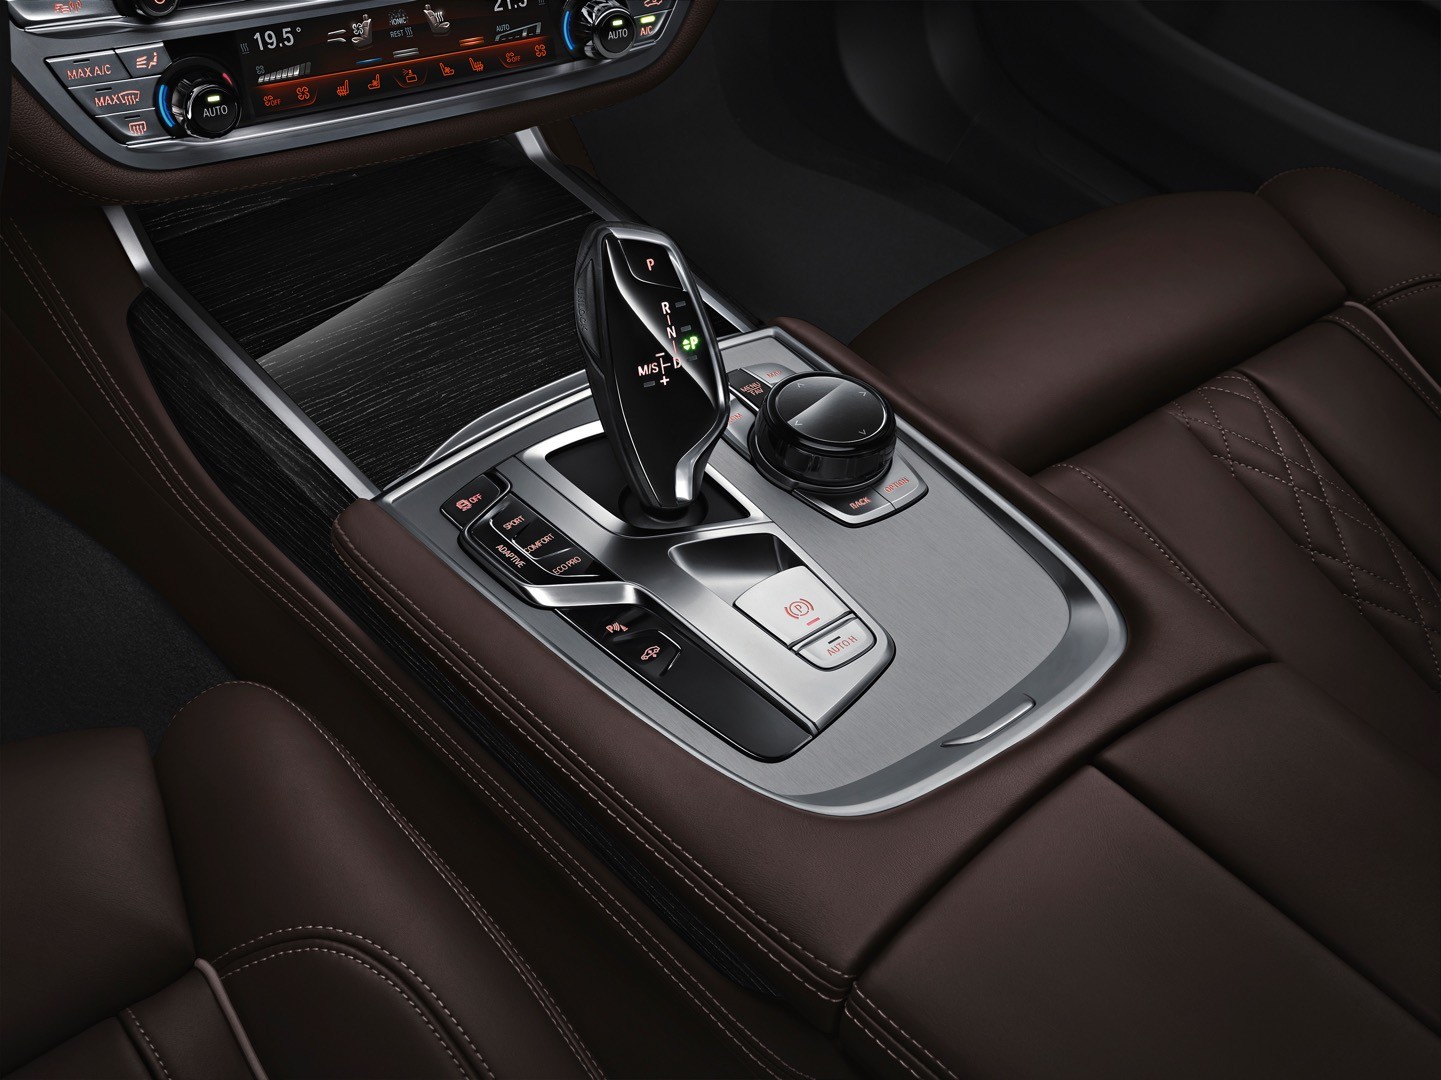 2016-bmw-7-series-finally-officially-unveiled-the-good-stuffs-inside-photo-gallery_118.jpg